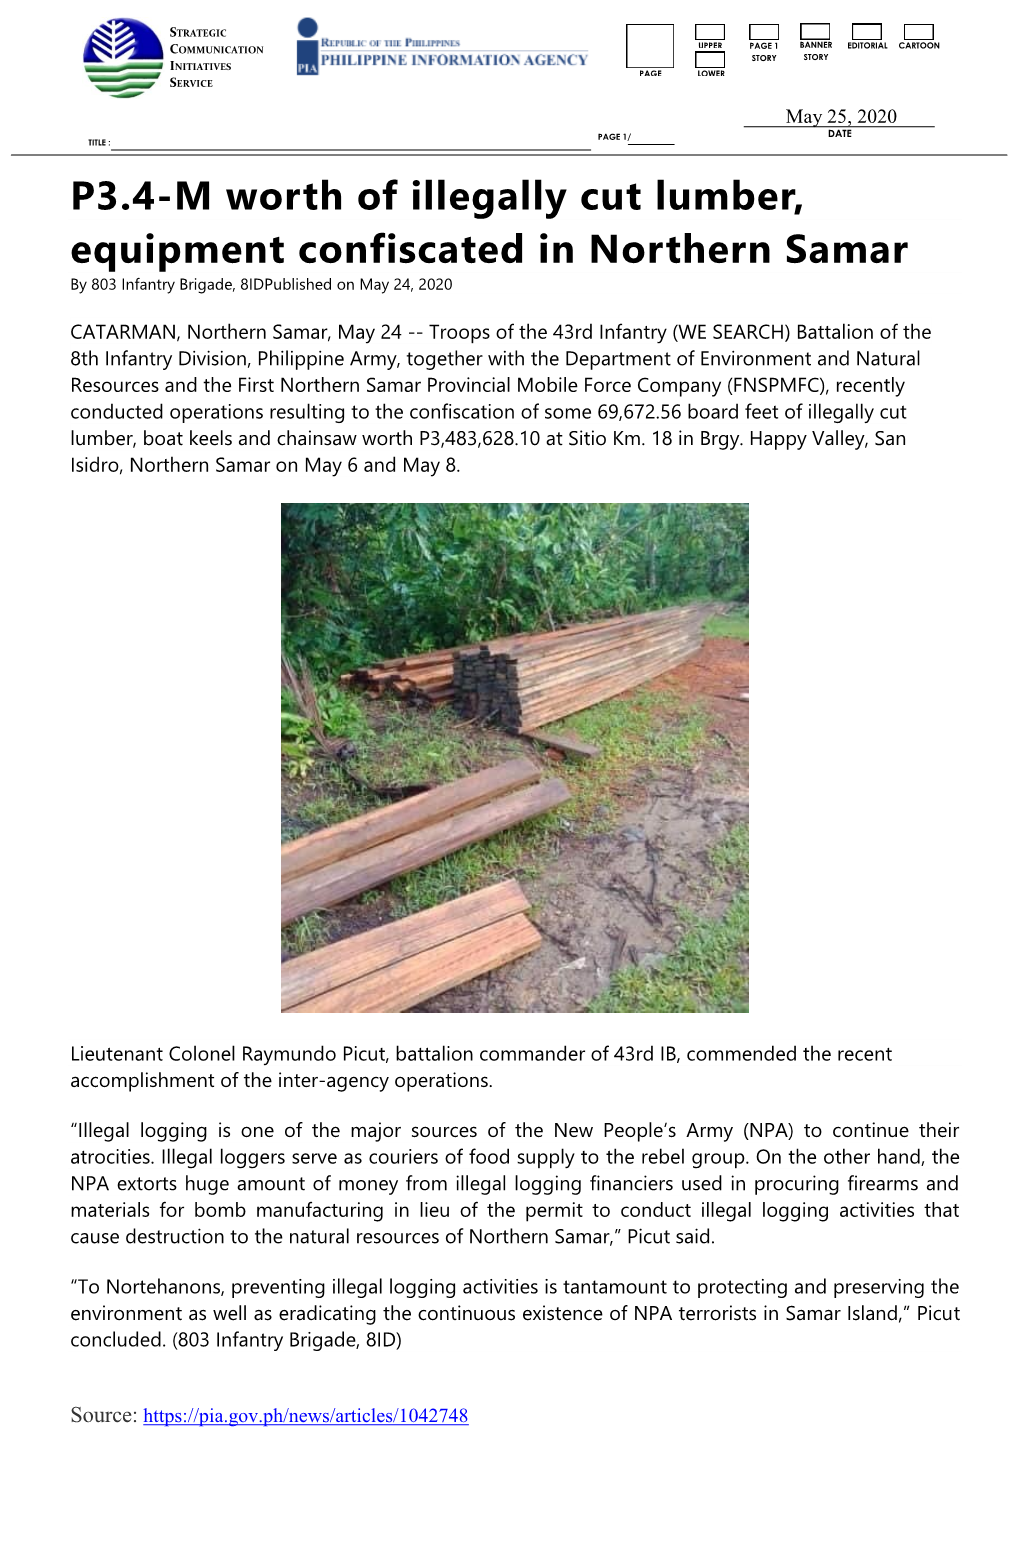 P3.4-M Worth of Illegally Cut Lumber, Equipment Confiscated in Northern Samar by 803 Infantry Brigade, 8Idpublished on May 24, 2020